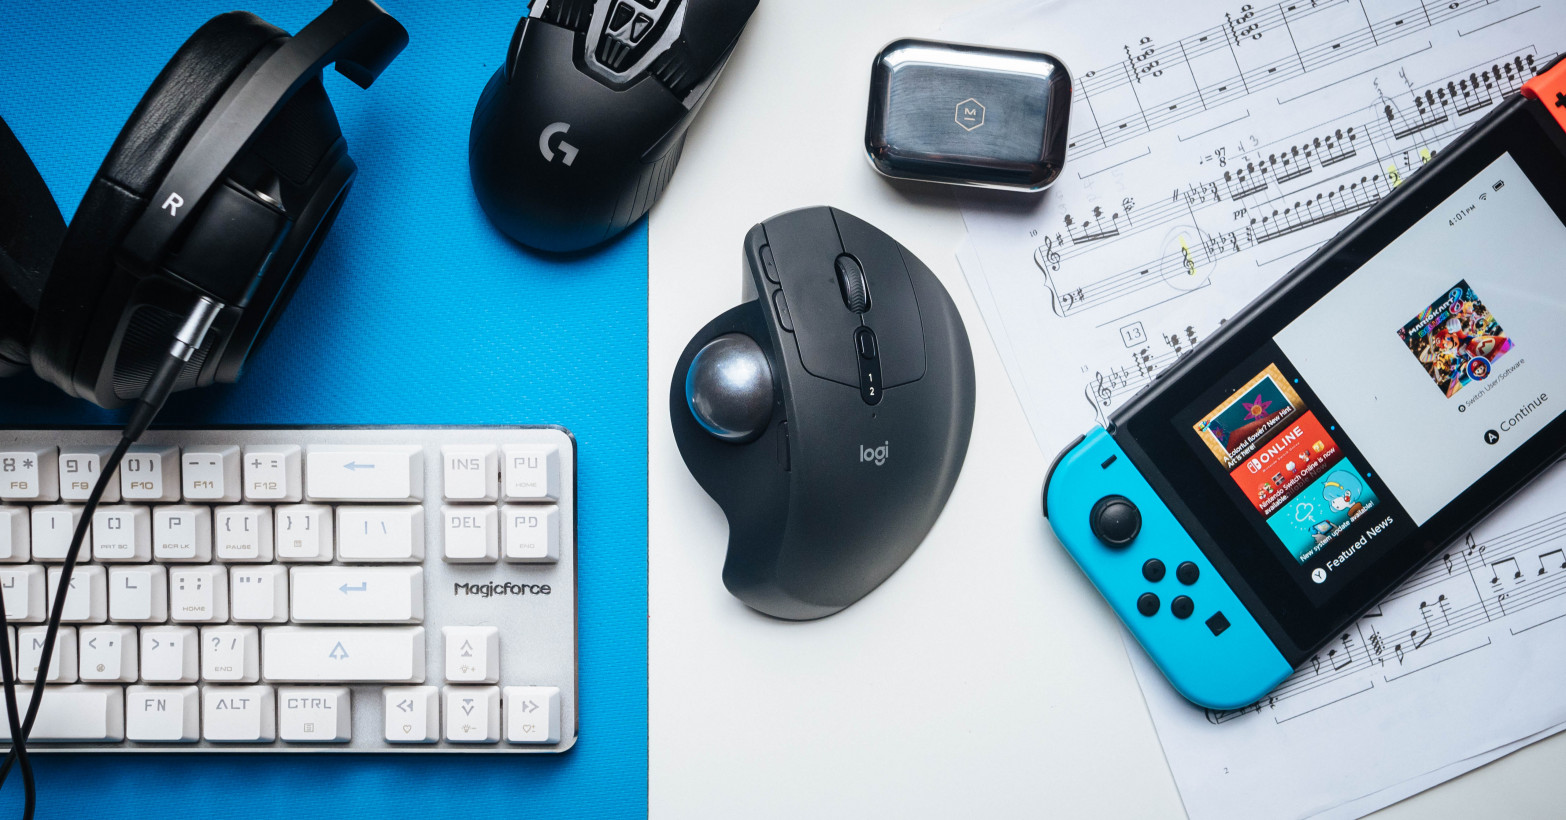 Logitech's MX Ergo almost convinced me switch a trackball mouse